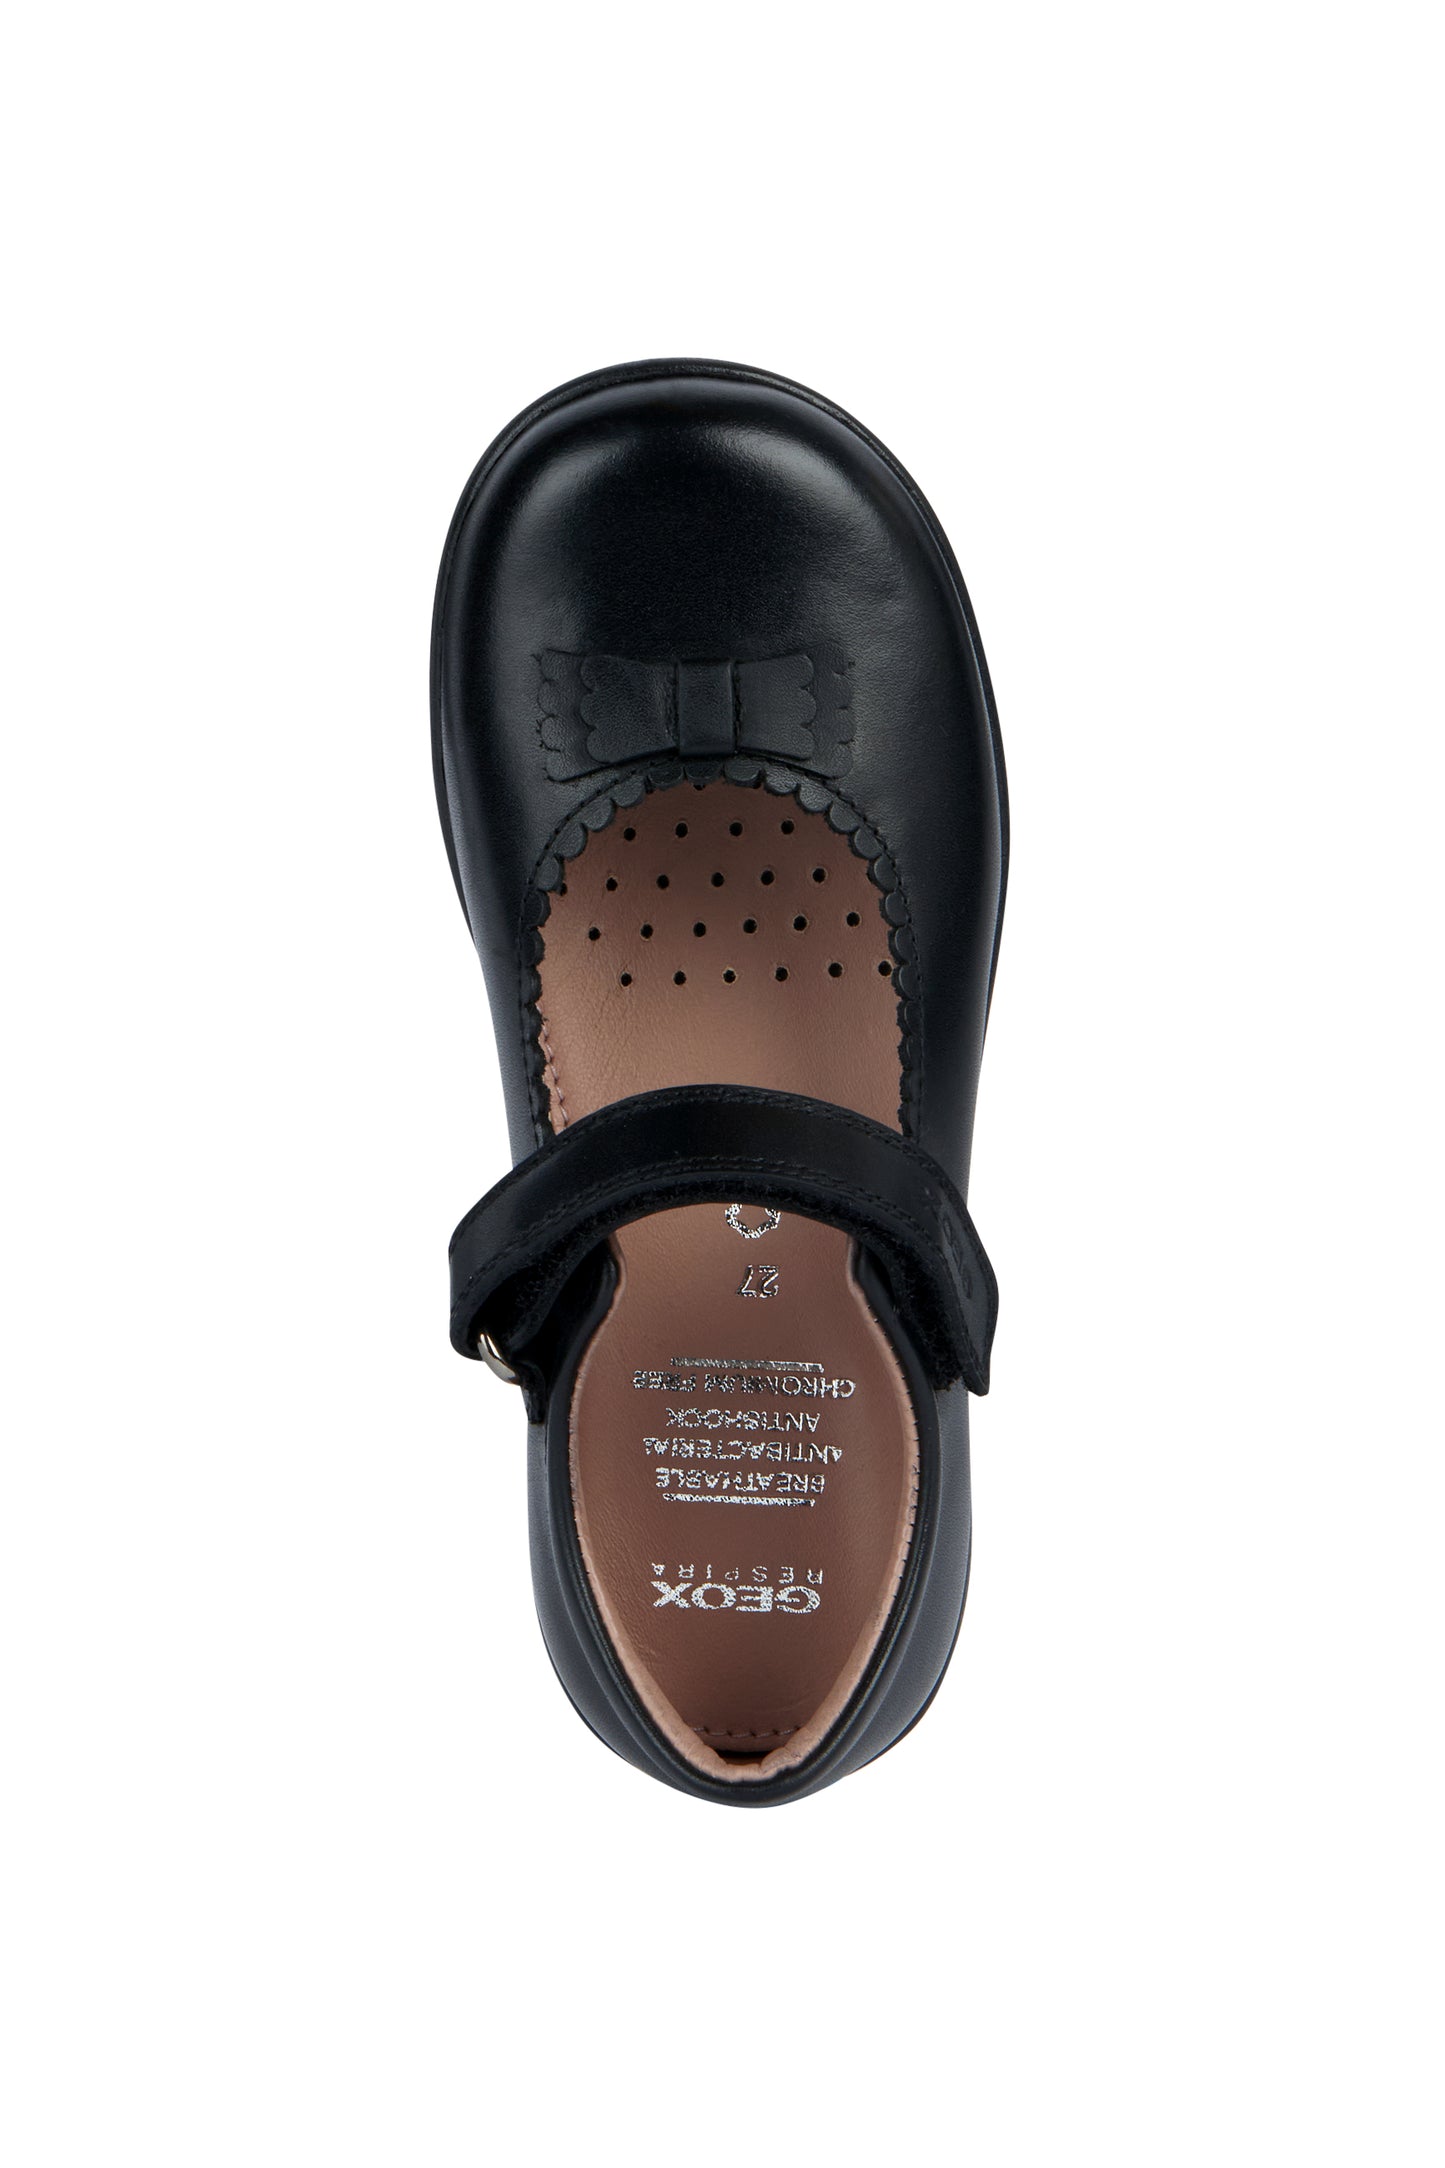 A girls school shoe by Geox, style Naimara in black with a velcro strap. Above view.